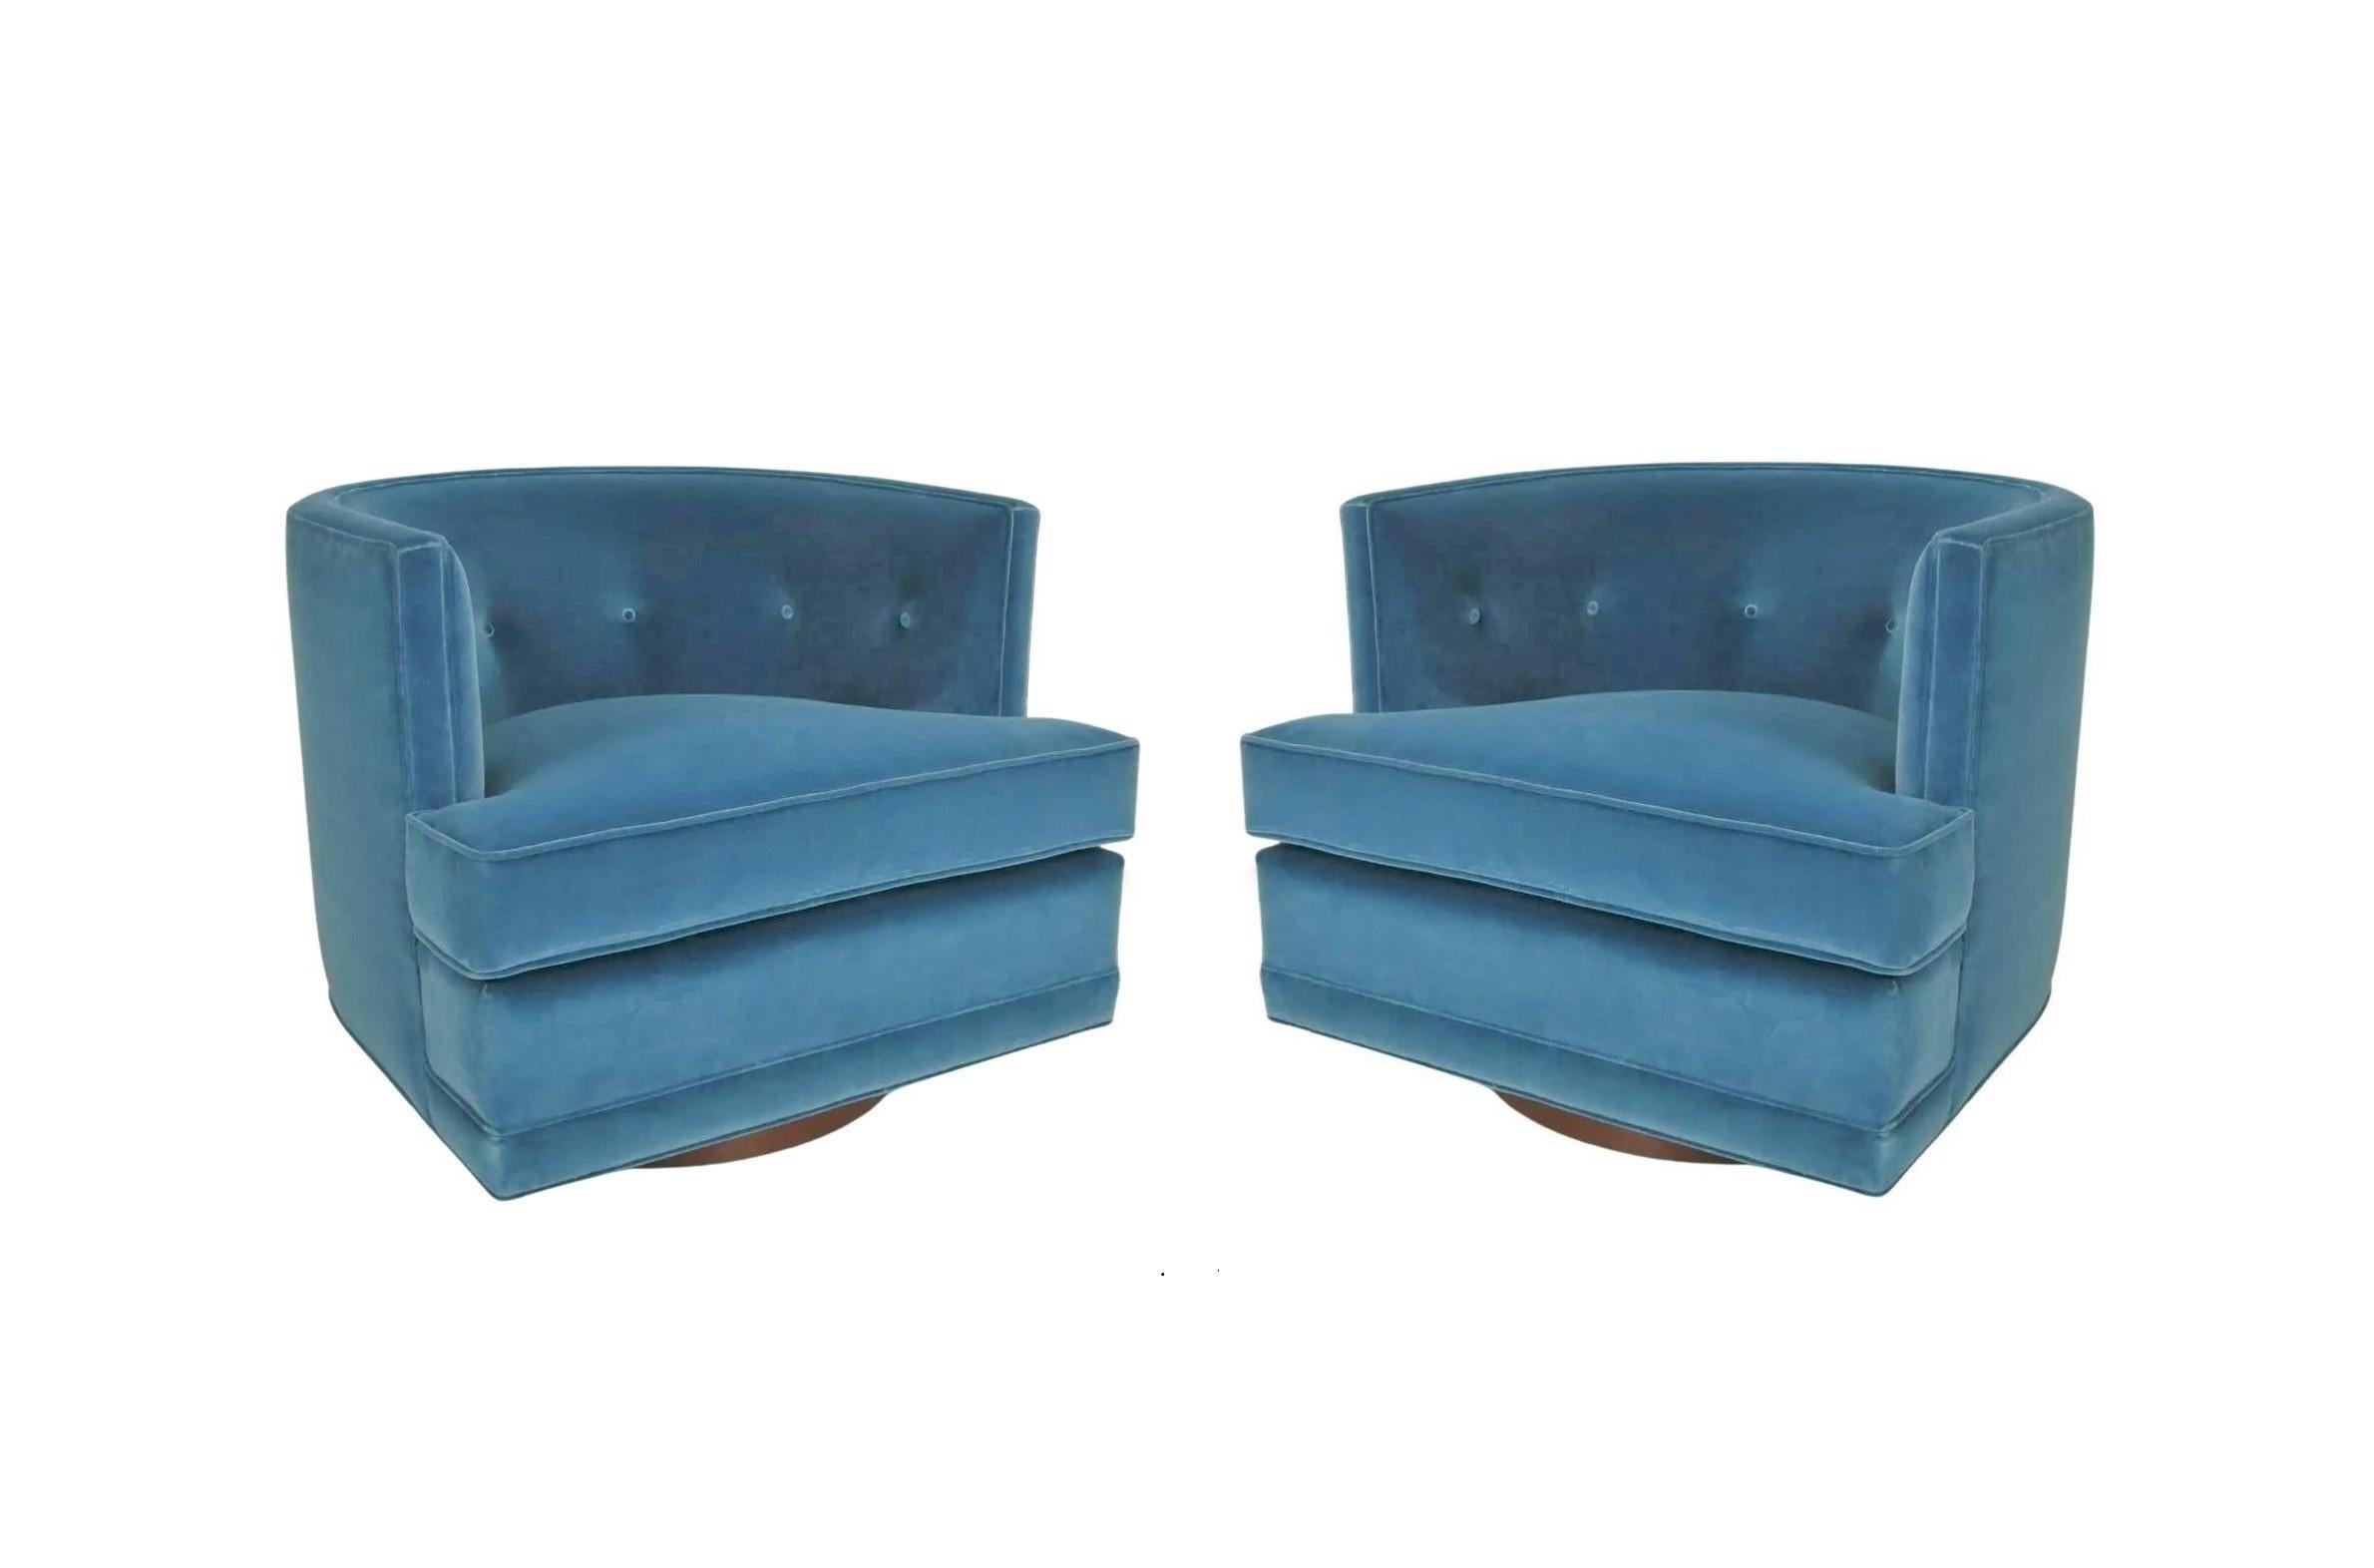 Retro glamour meets modern comfort pair of swivel lounge chairs attributed to Harvey Probber. Pristinely tailored chairs feature a barreled tufted back creating a cozy embrace, oversized detached plush cushion seat and flat front aprons, freshly